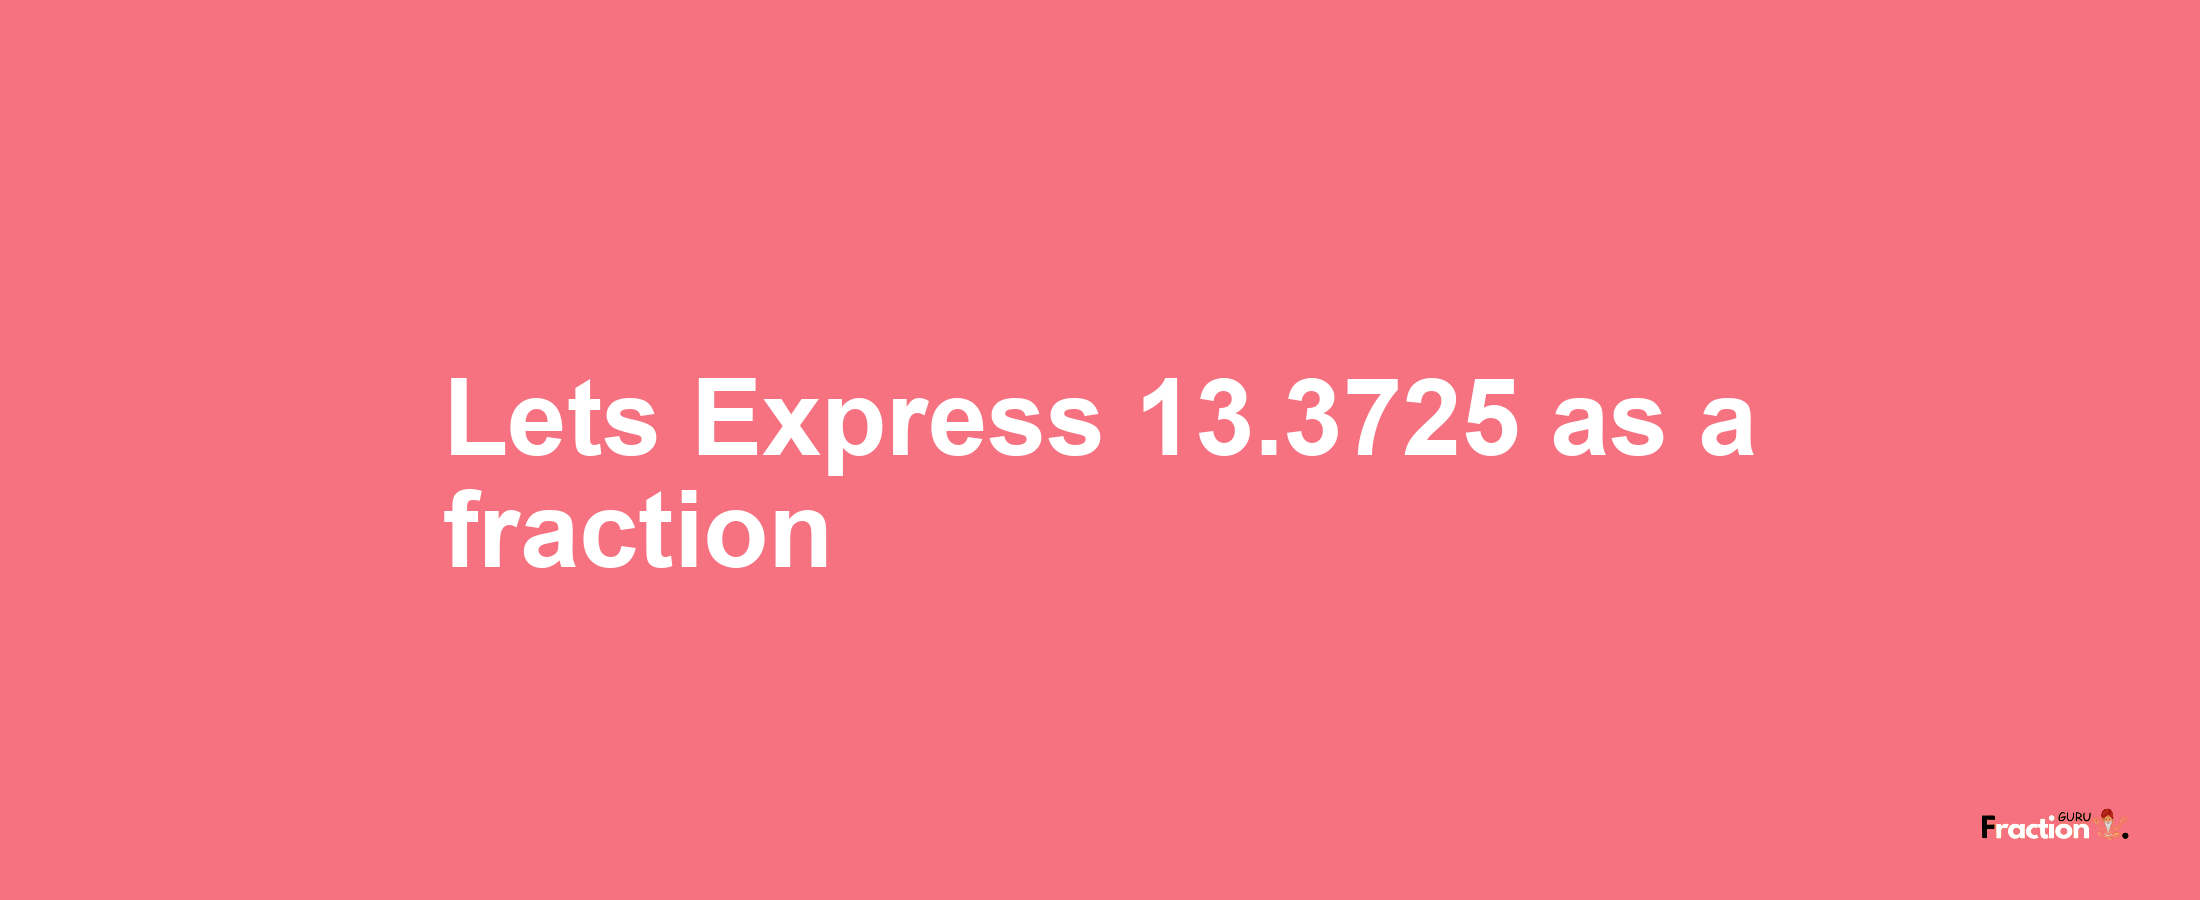 Lets Express 13.3725 as afraction